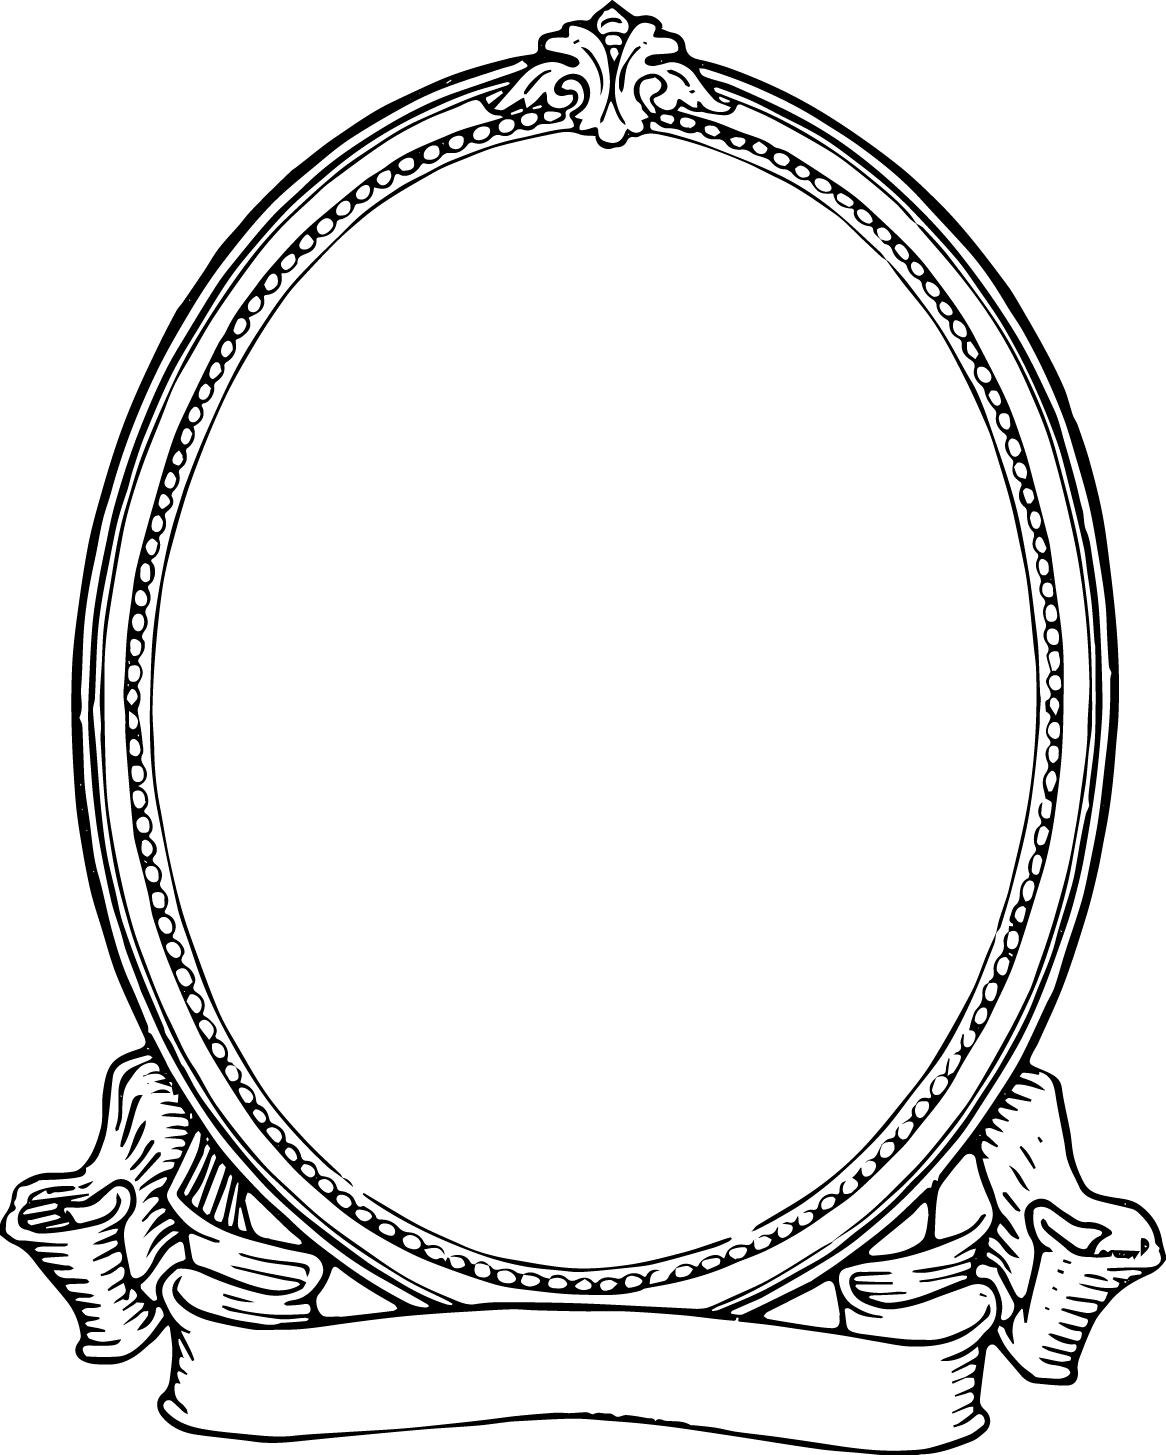 Free Clip Art - Vintage Photo Frame | Oh So Nifty Vintage Graphics